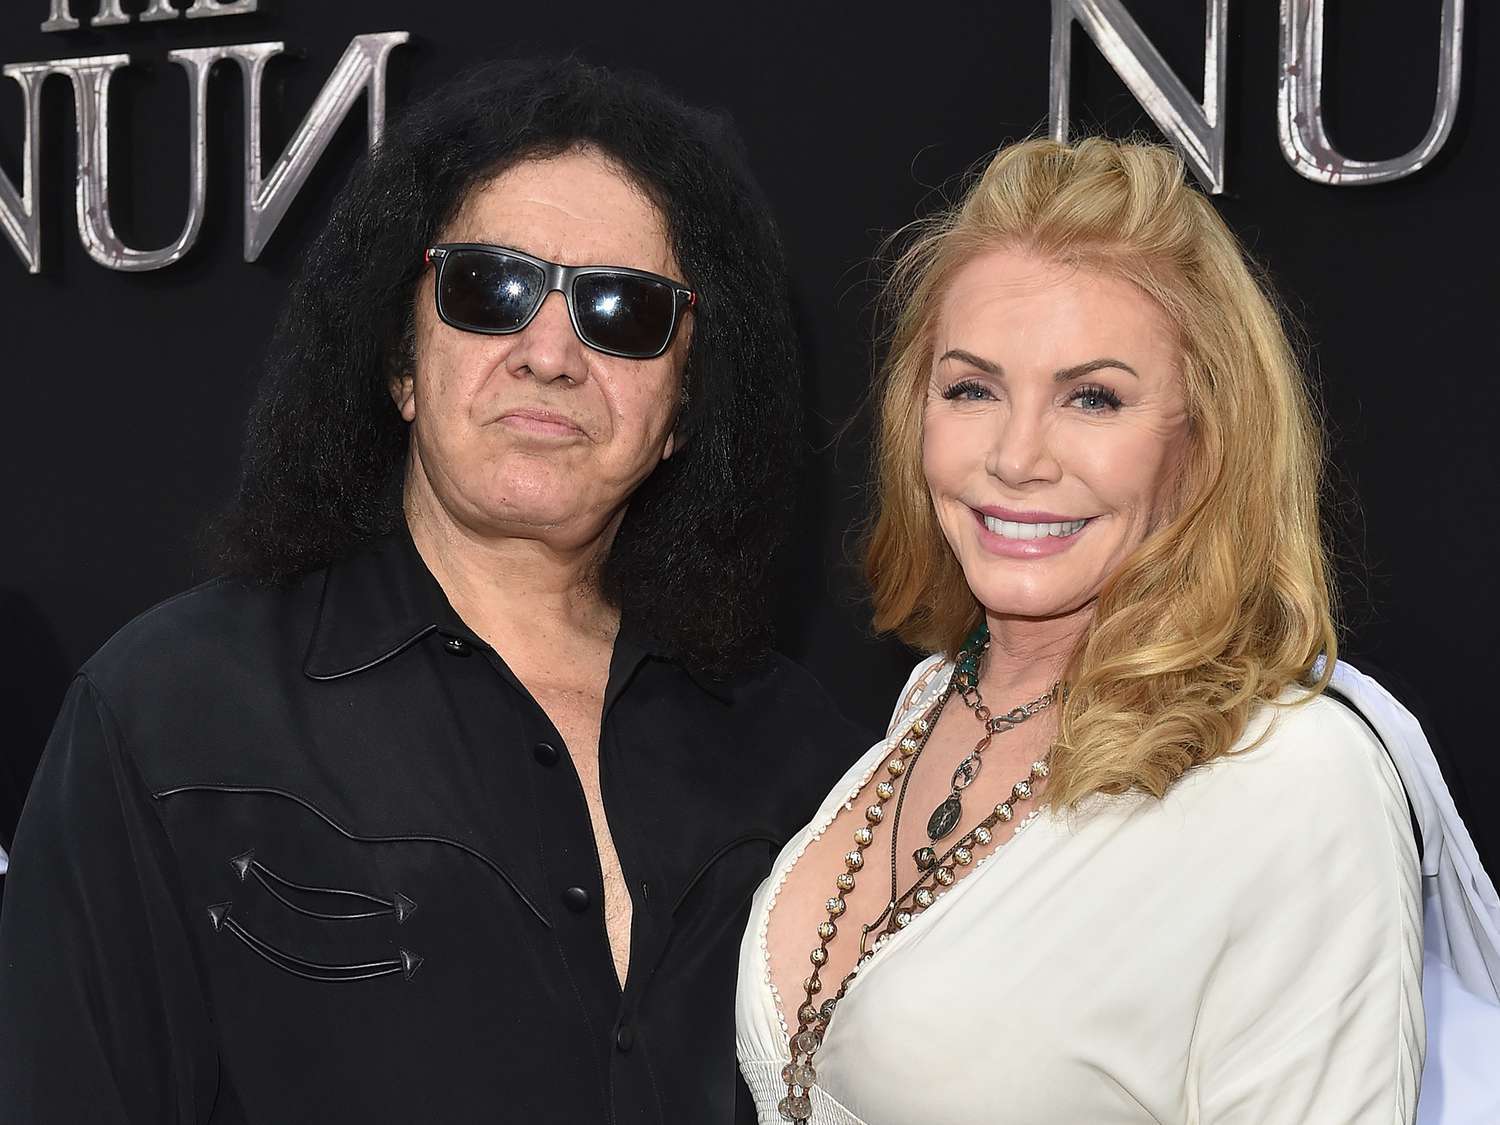 Gene Simmons Biography: Net Worth, Wife, Age, Children, Height, Movies, Bands, Parents